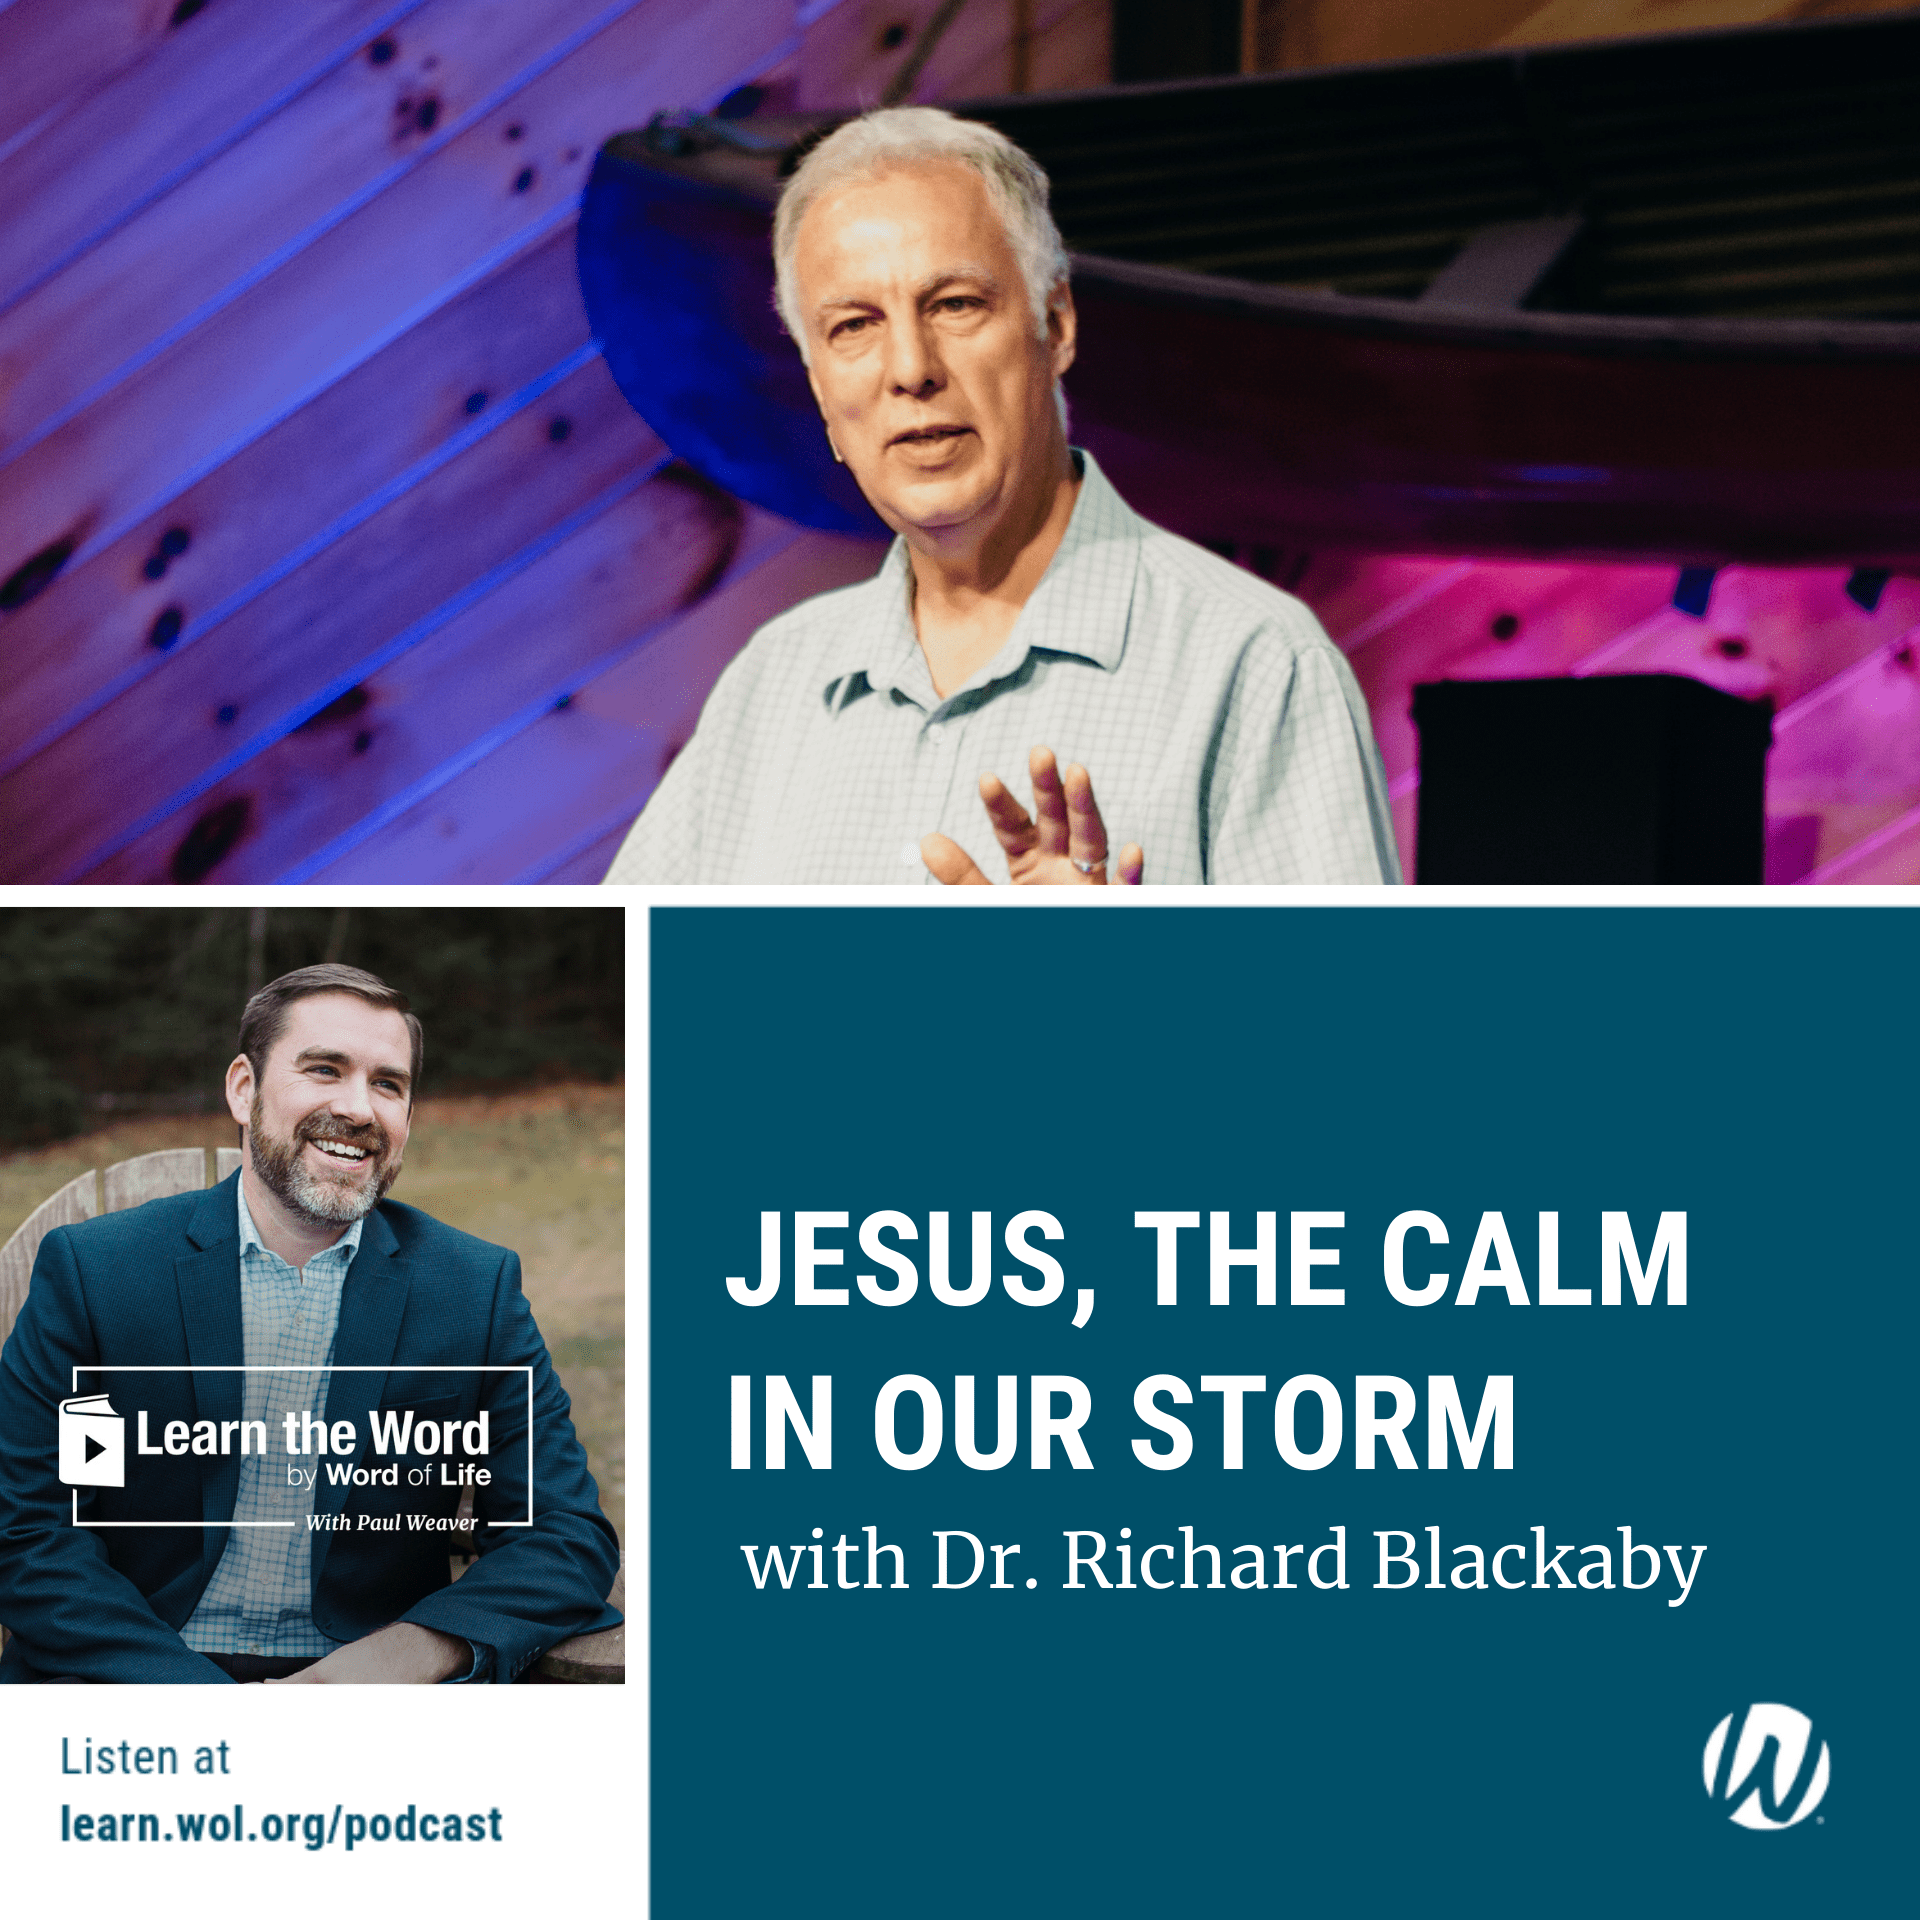 LTW195 - Jesus, the Calm in Our Storm with Dr. Richard Blackaby